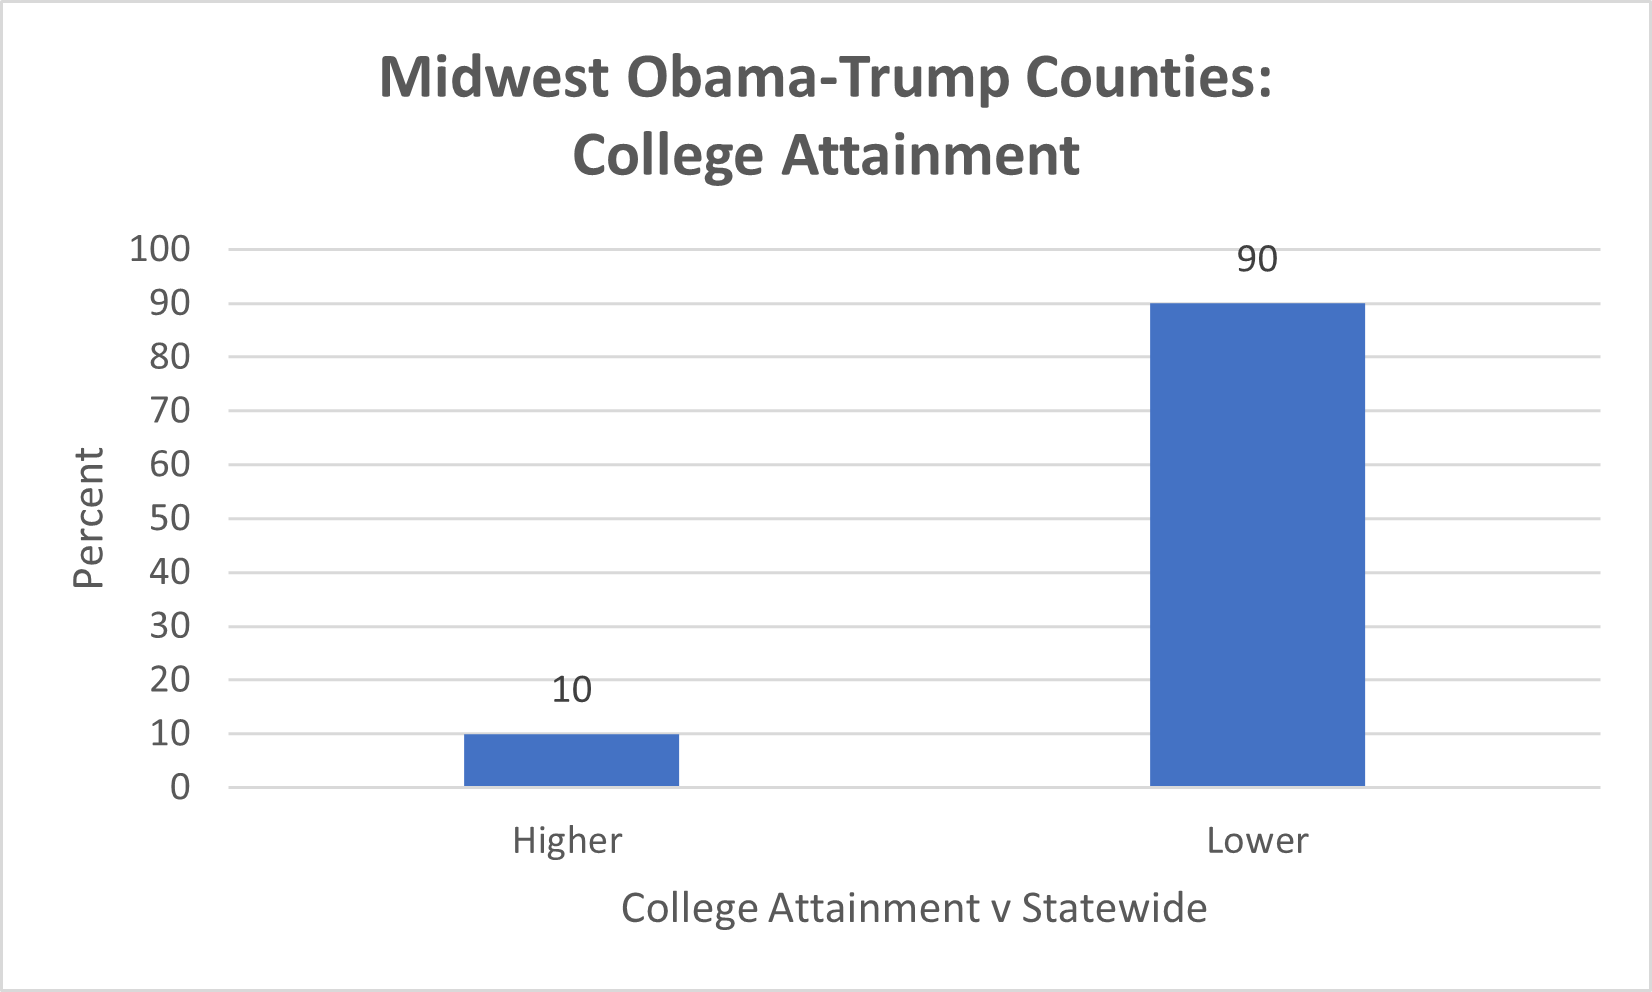 Bar graph of Midwest Obama-Trump Counties: College Attainment